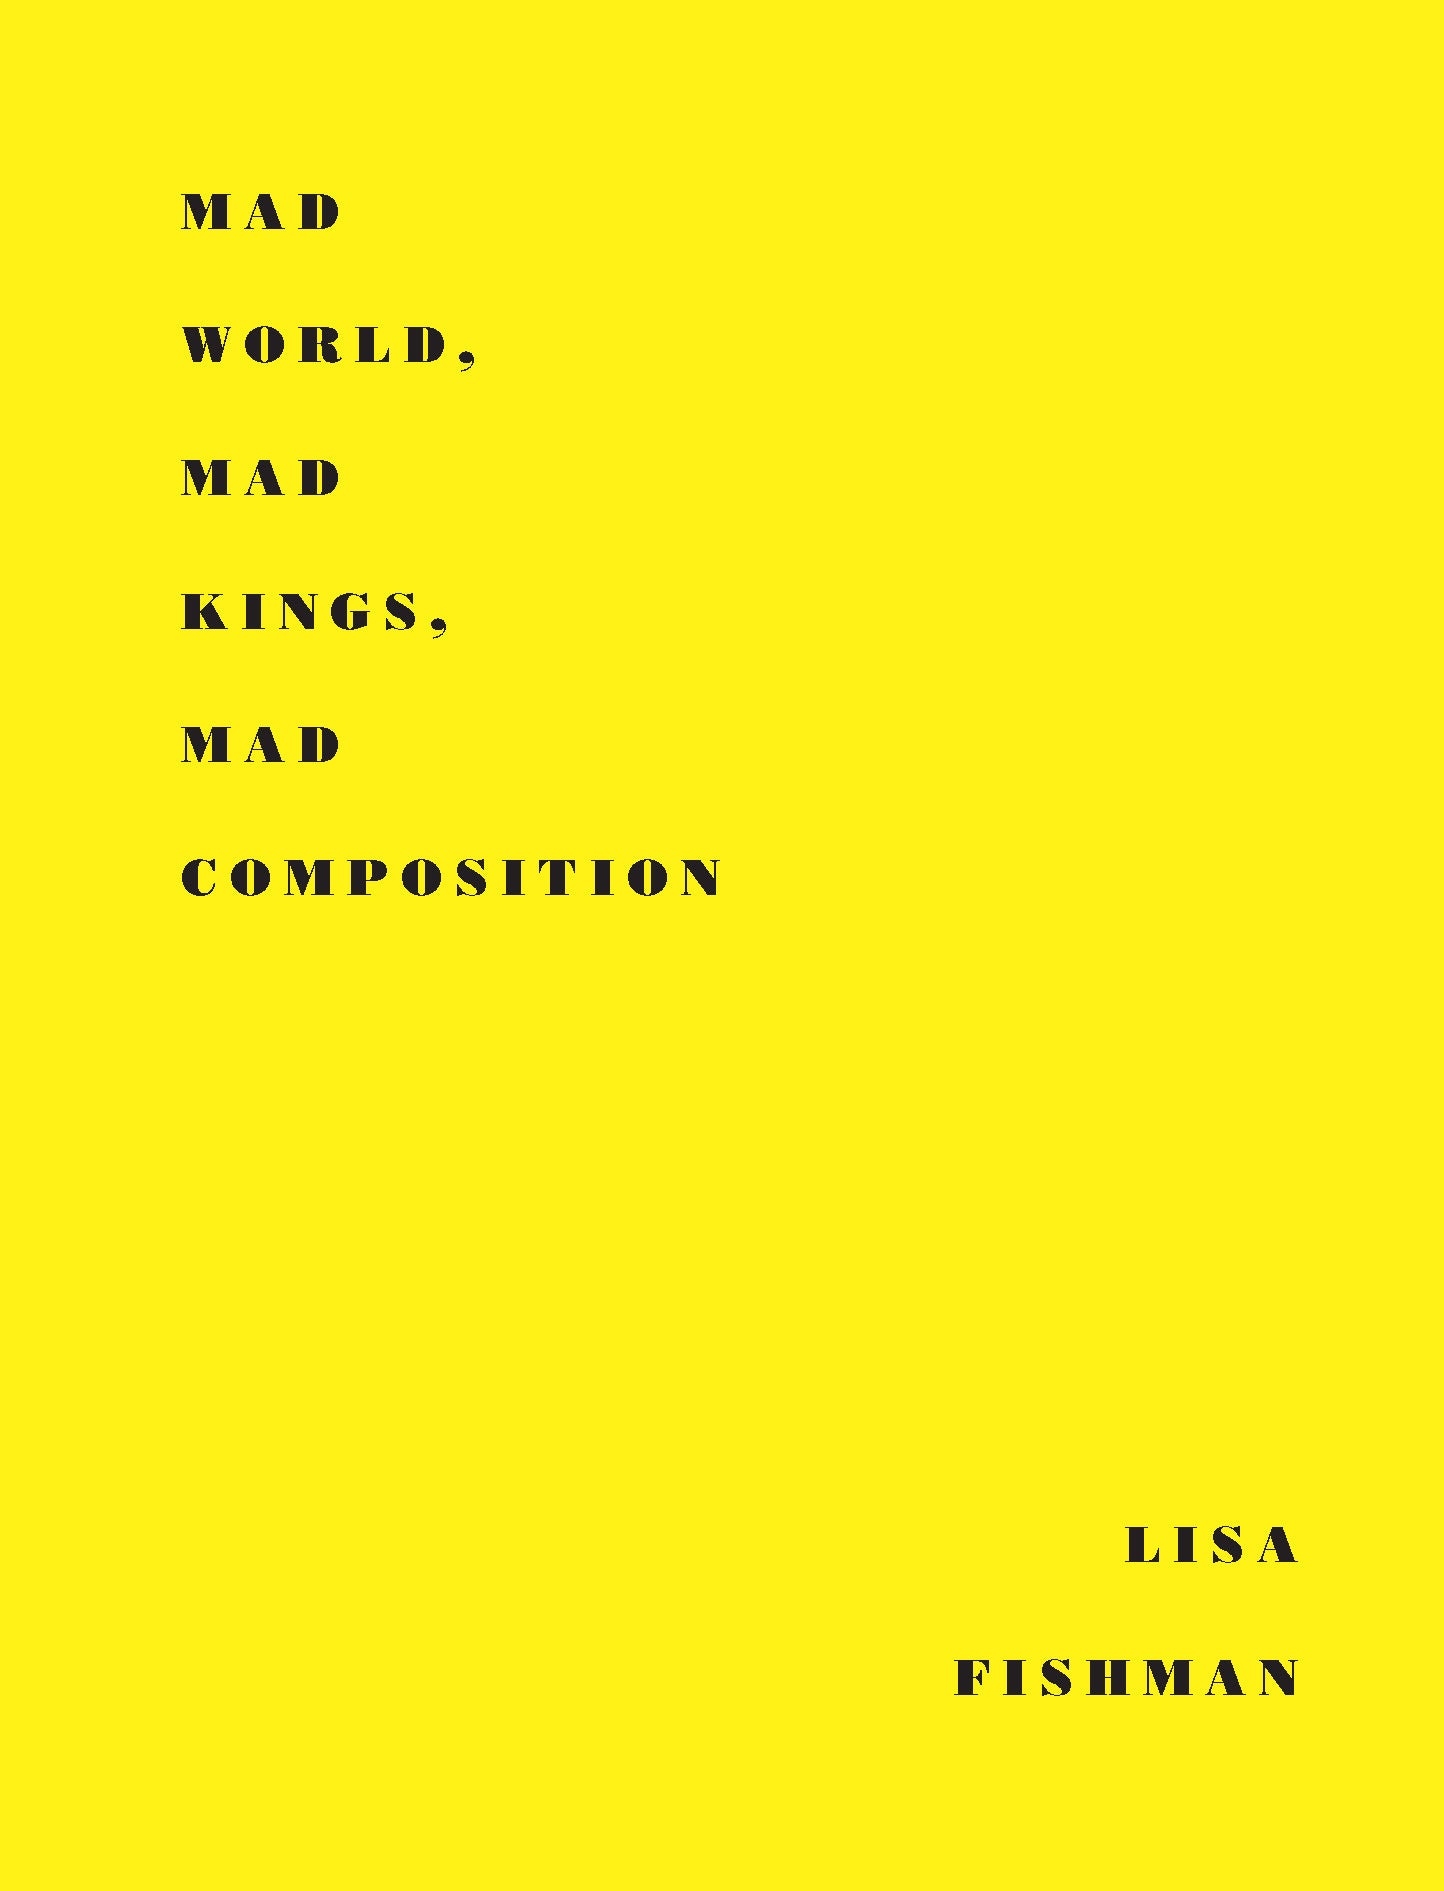 Mad World, Mad Kings, Mad Composition - limited edition hardcover